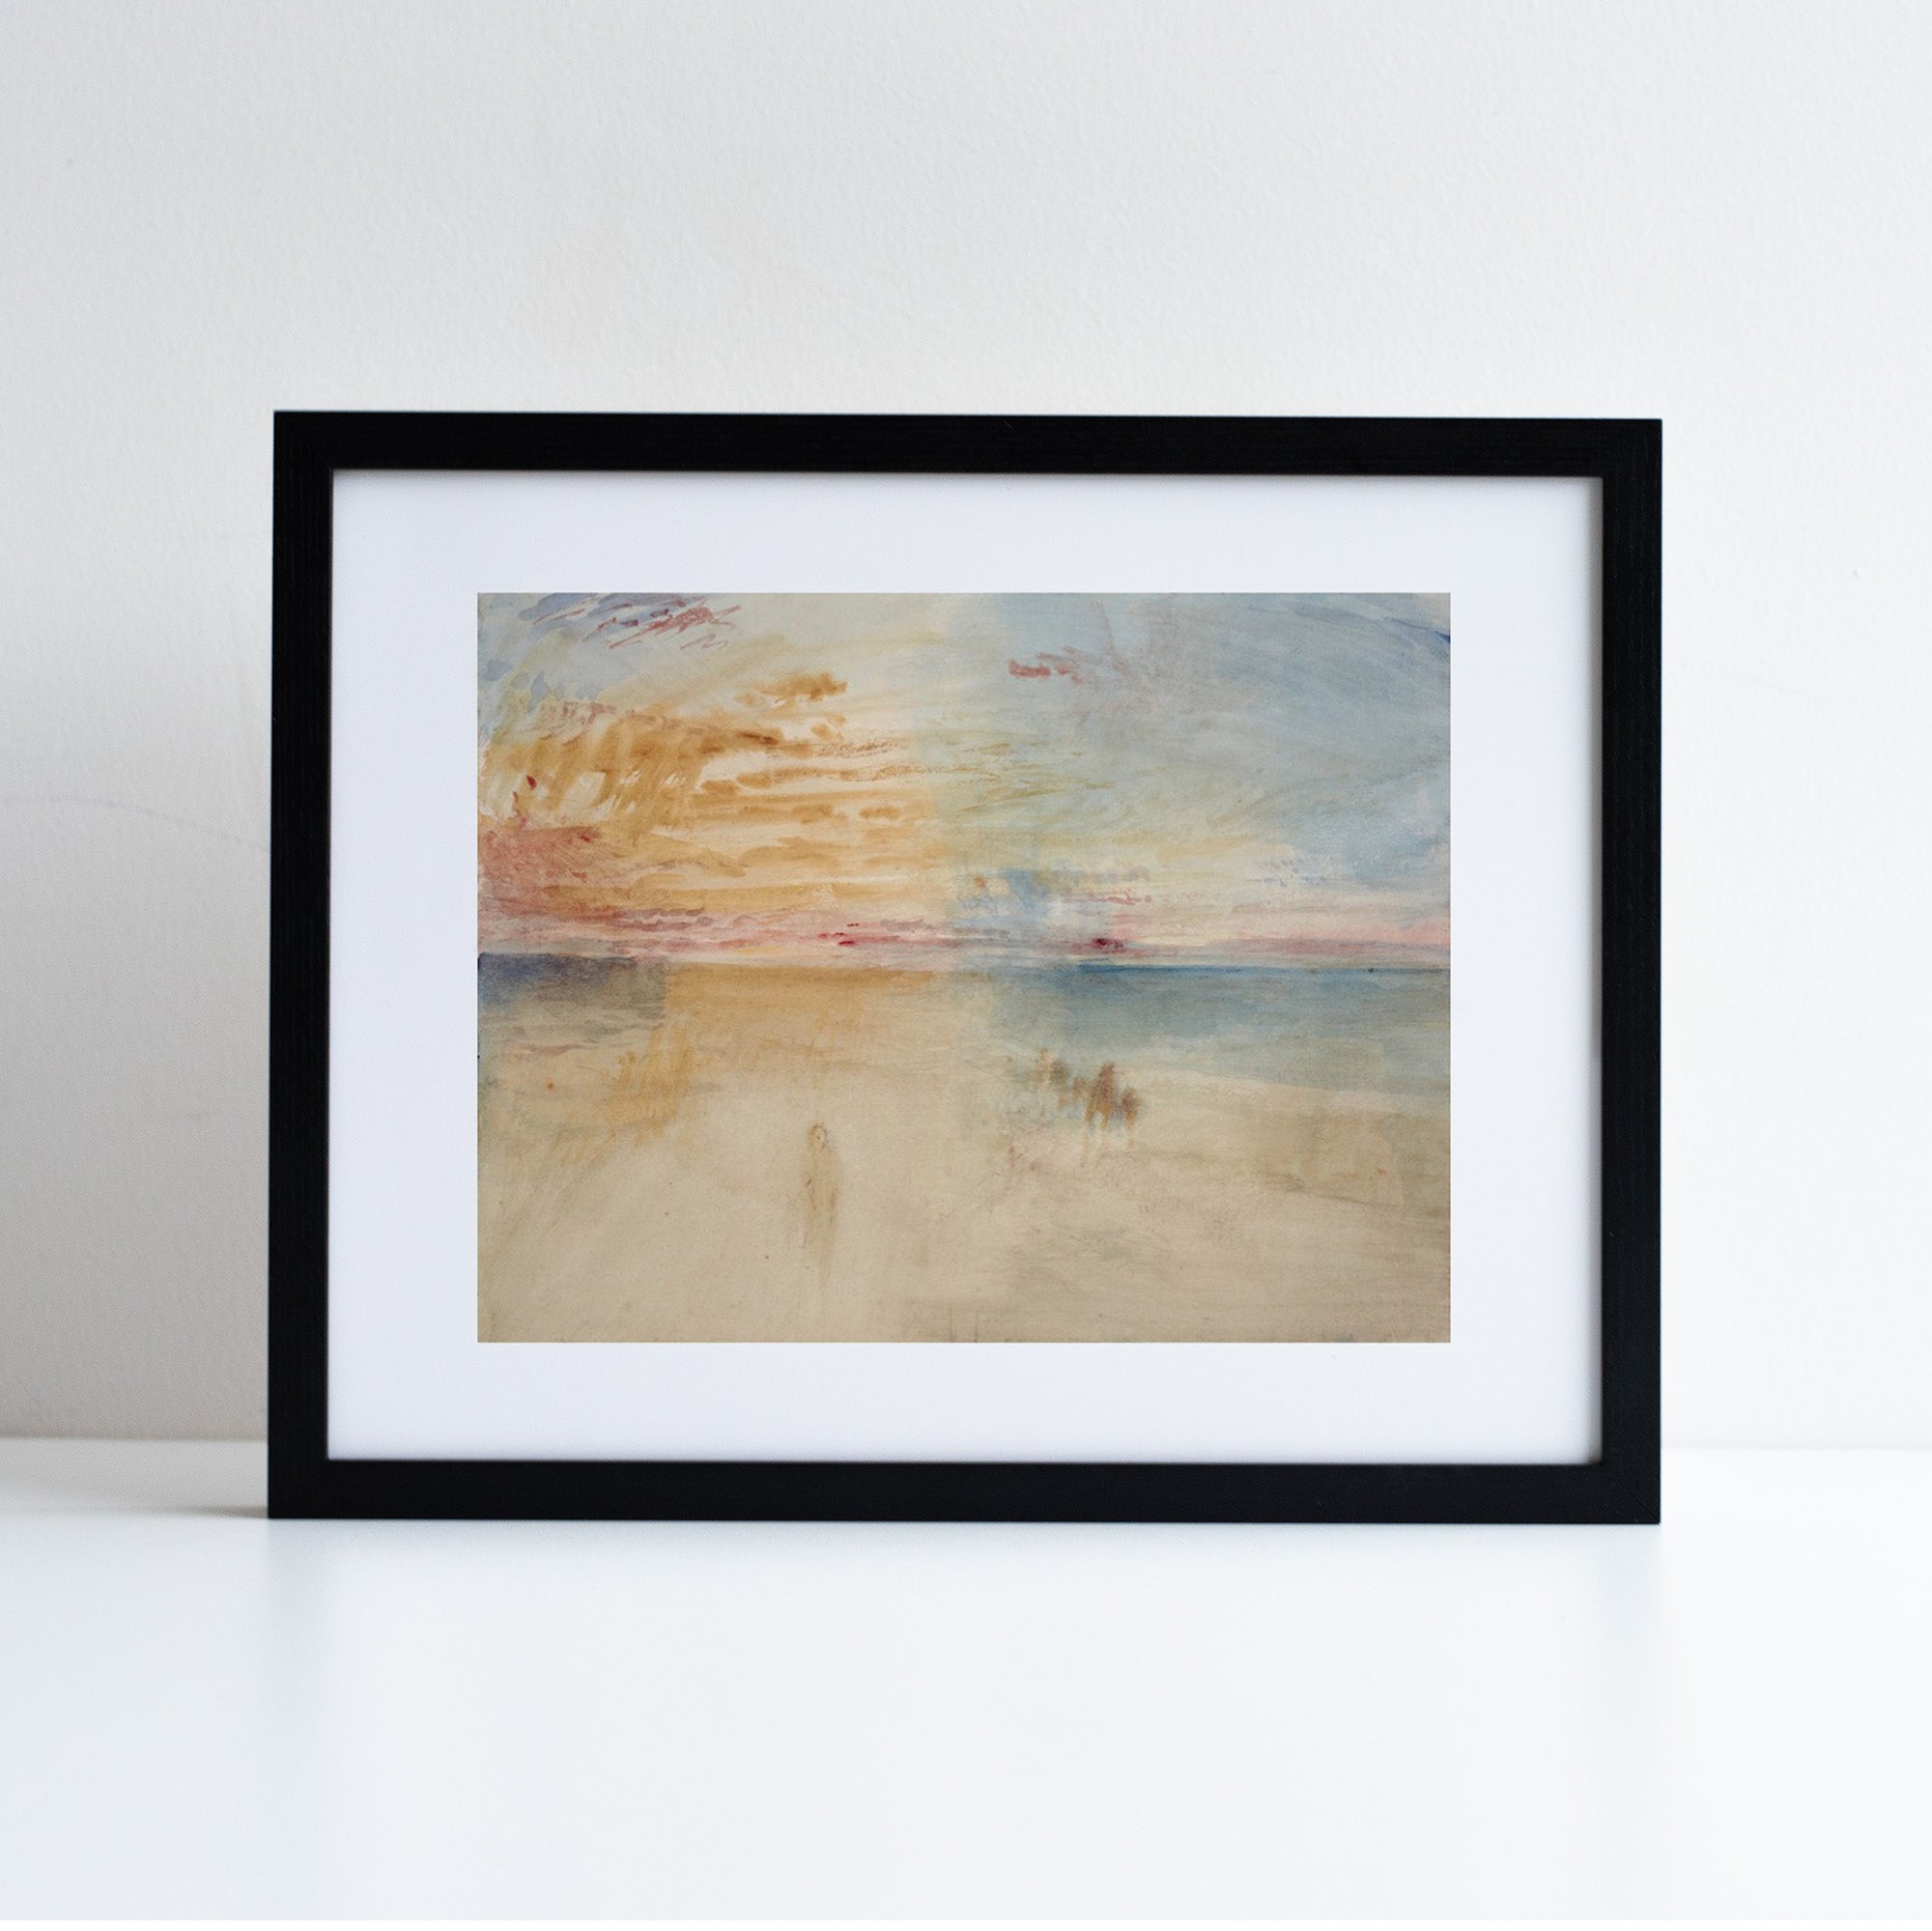 Framed reproduction of Sunset on Wet Sand by William Turner. Seascape painting.